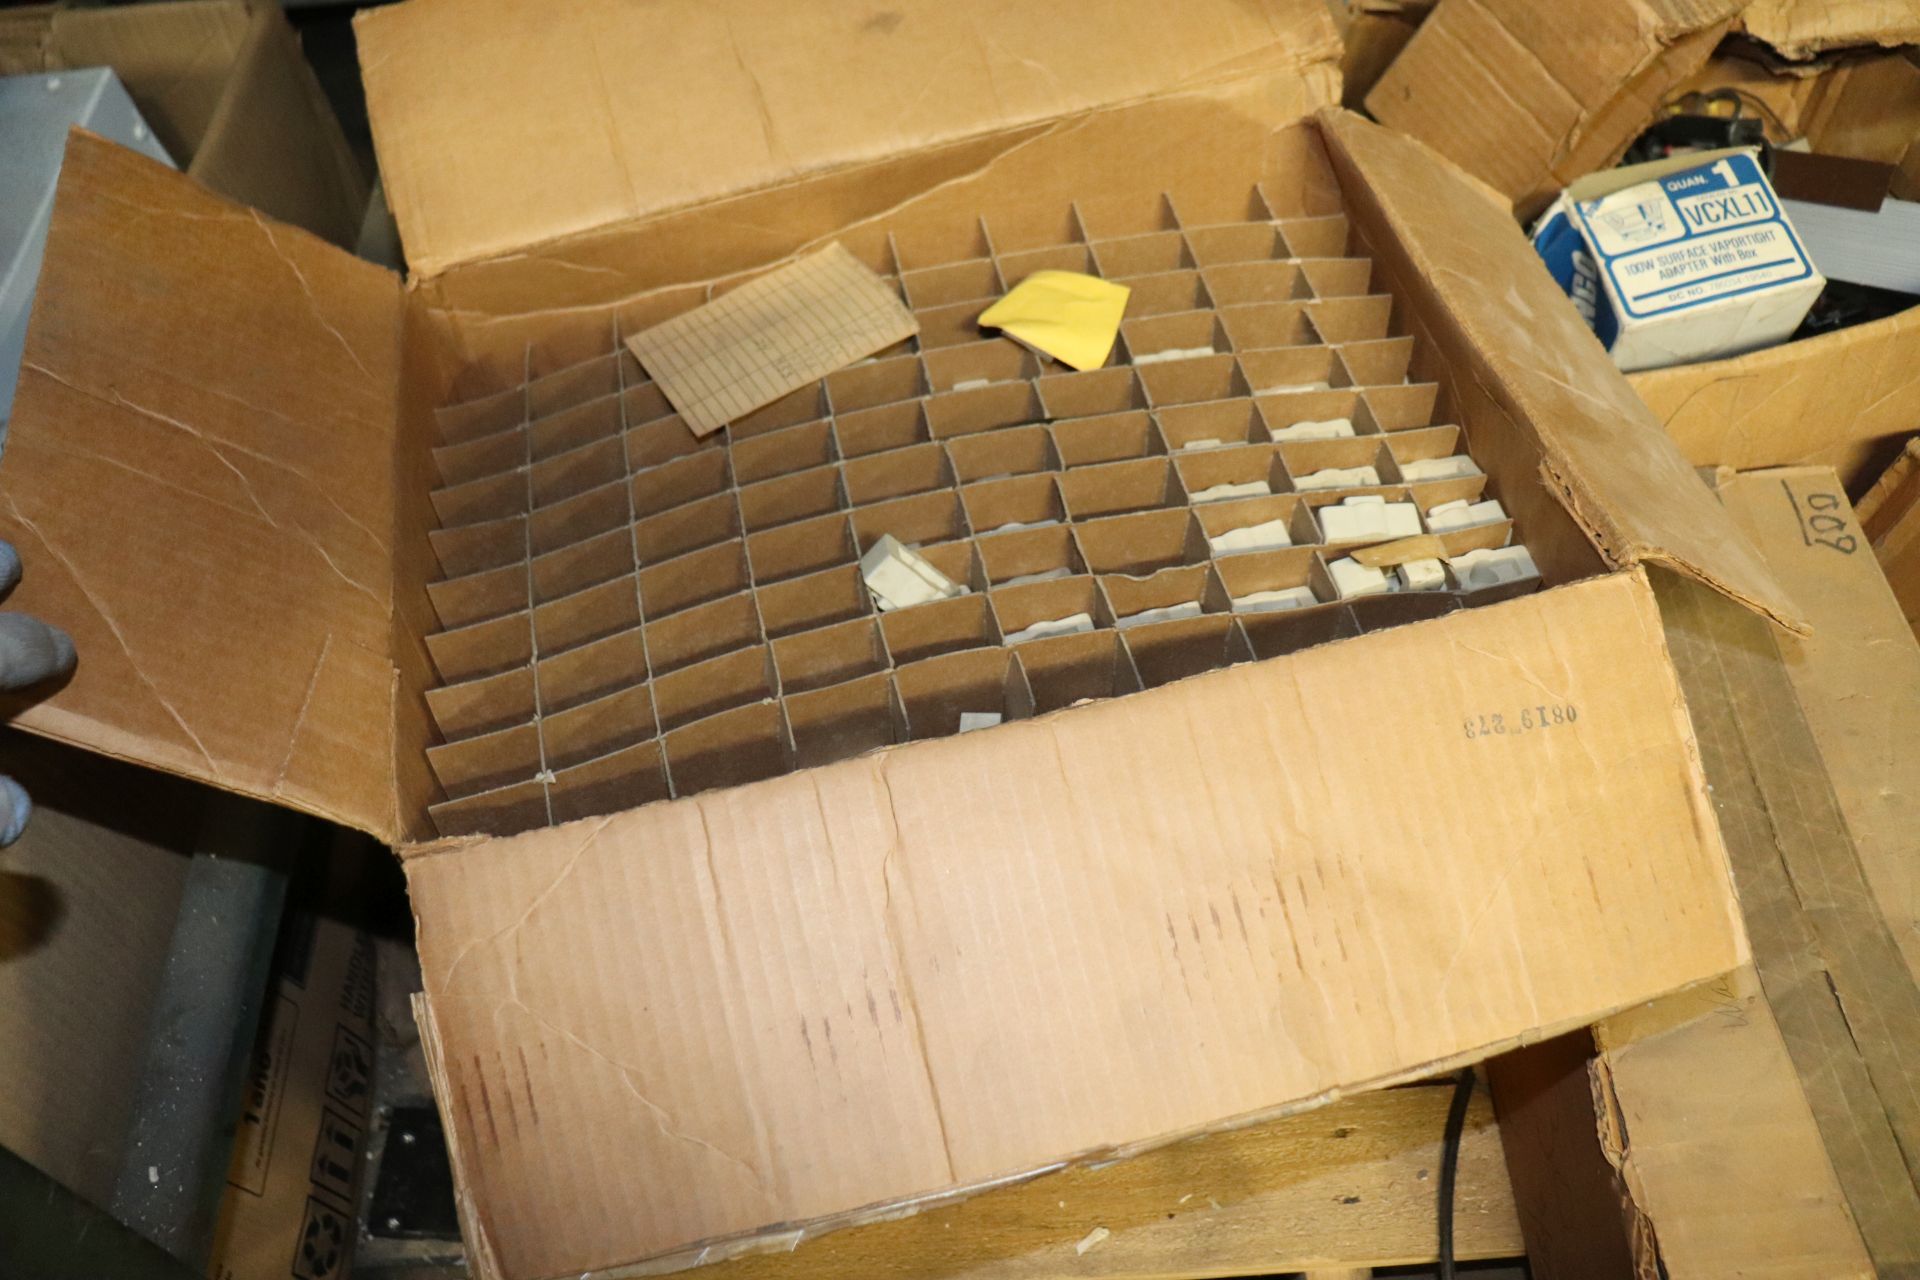 Pallet of small light bulbs, electrical components, circuit breakers, power bricks, and electric mot - Image 2 of 11